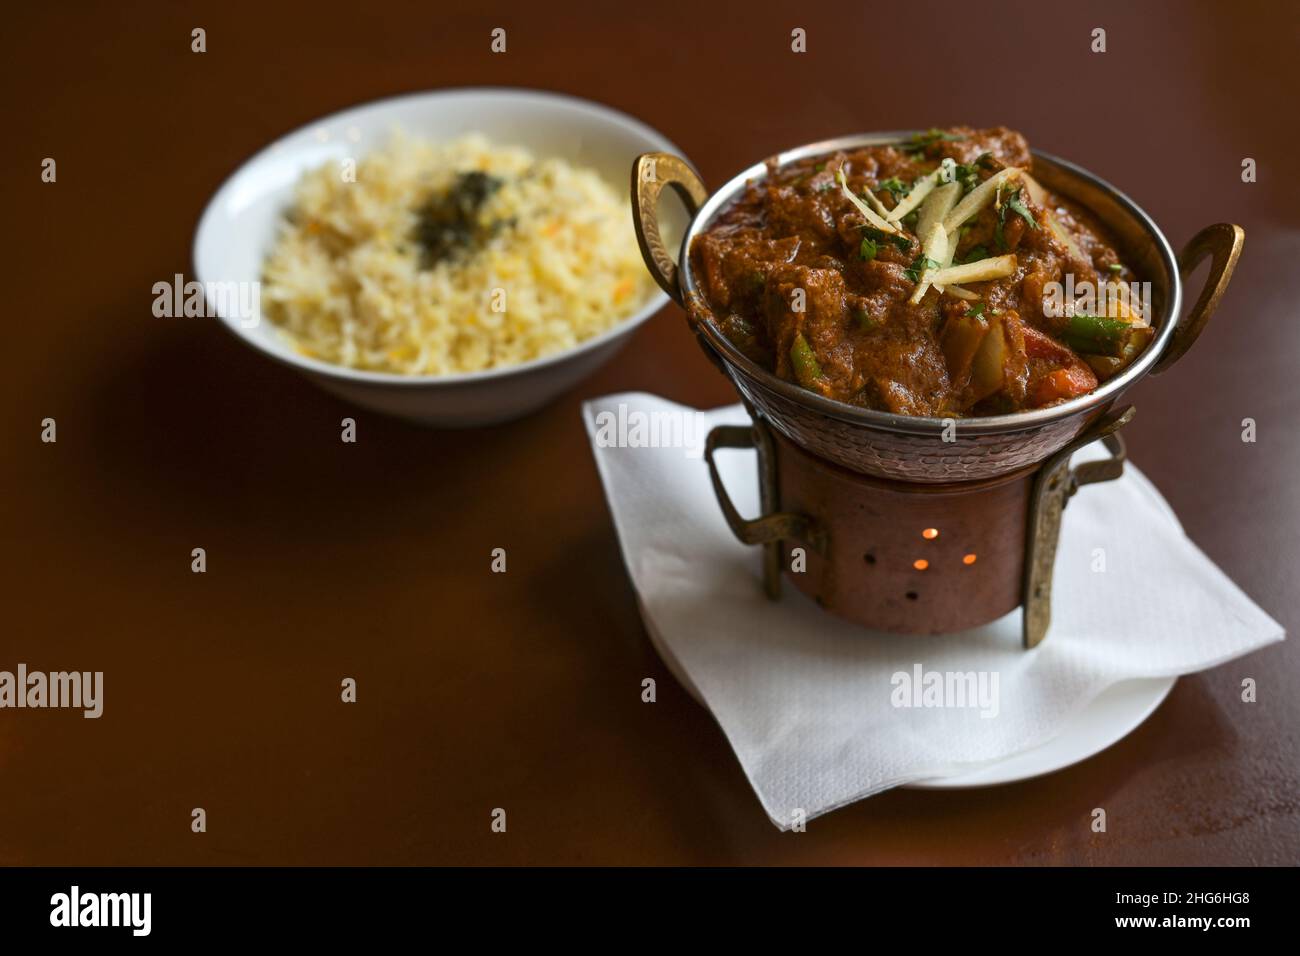 Indian curry dish with meat, vegetables and ginger served on a small metal stove with a candle like a tea warmer and a bowl of rice on a brown table, Stock Photo